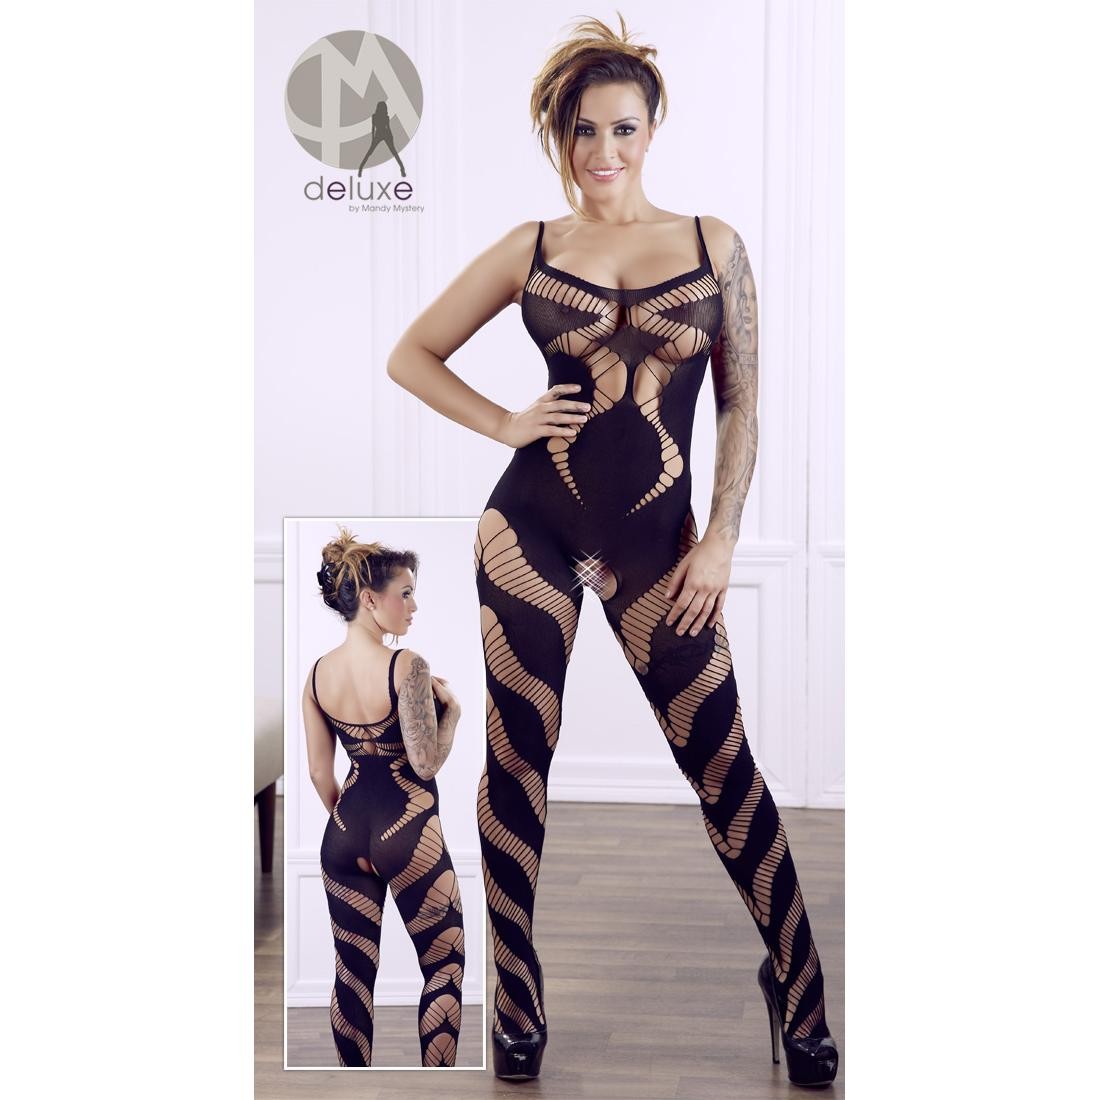  Mandy  Mystery  Deluxe  -  Catsuit  ouvert 